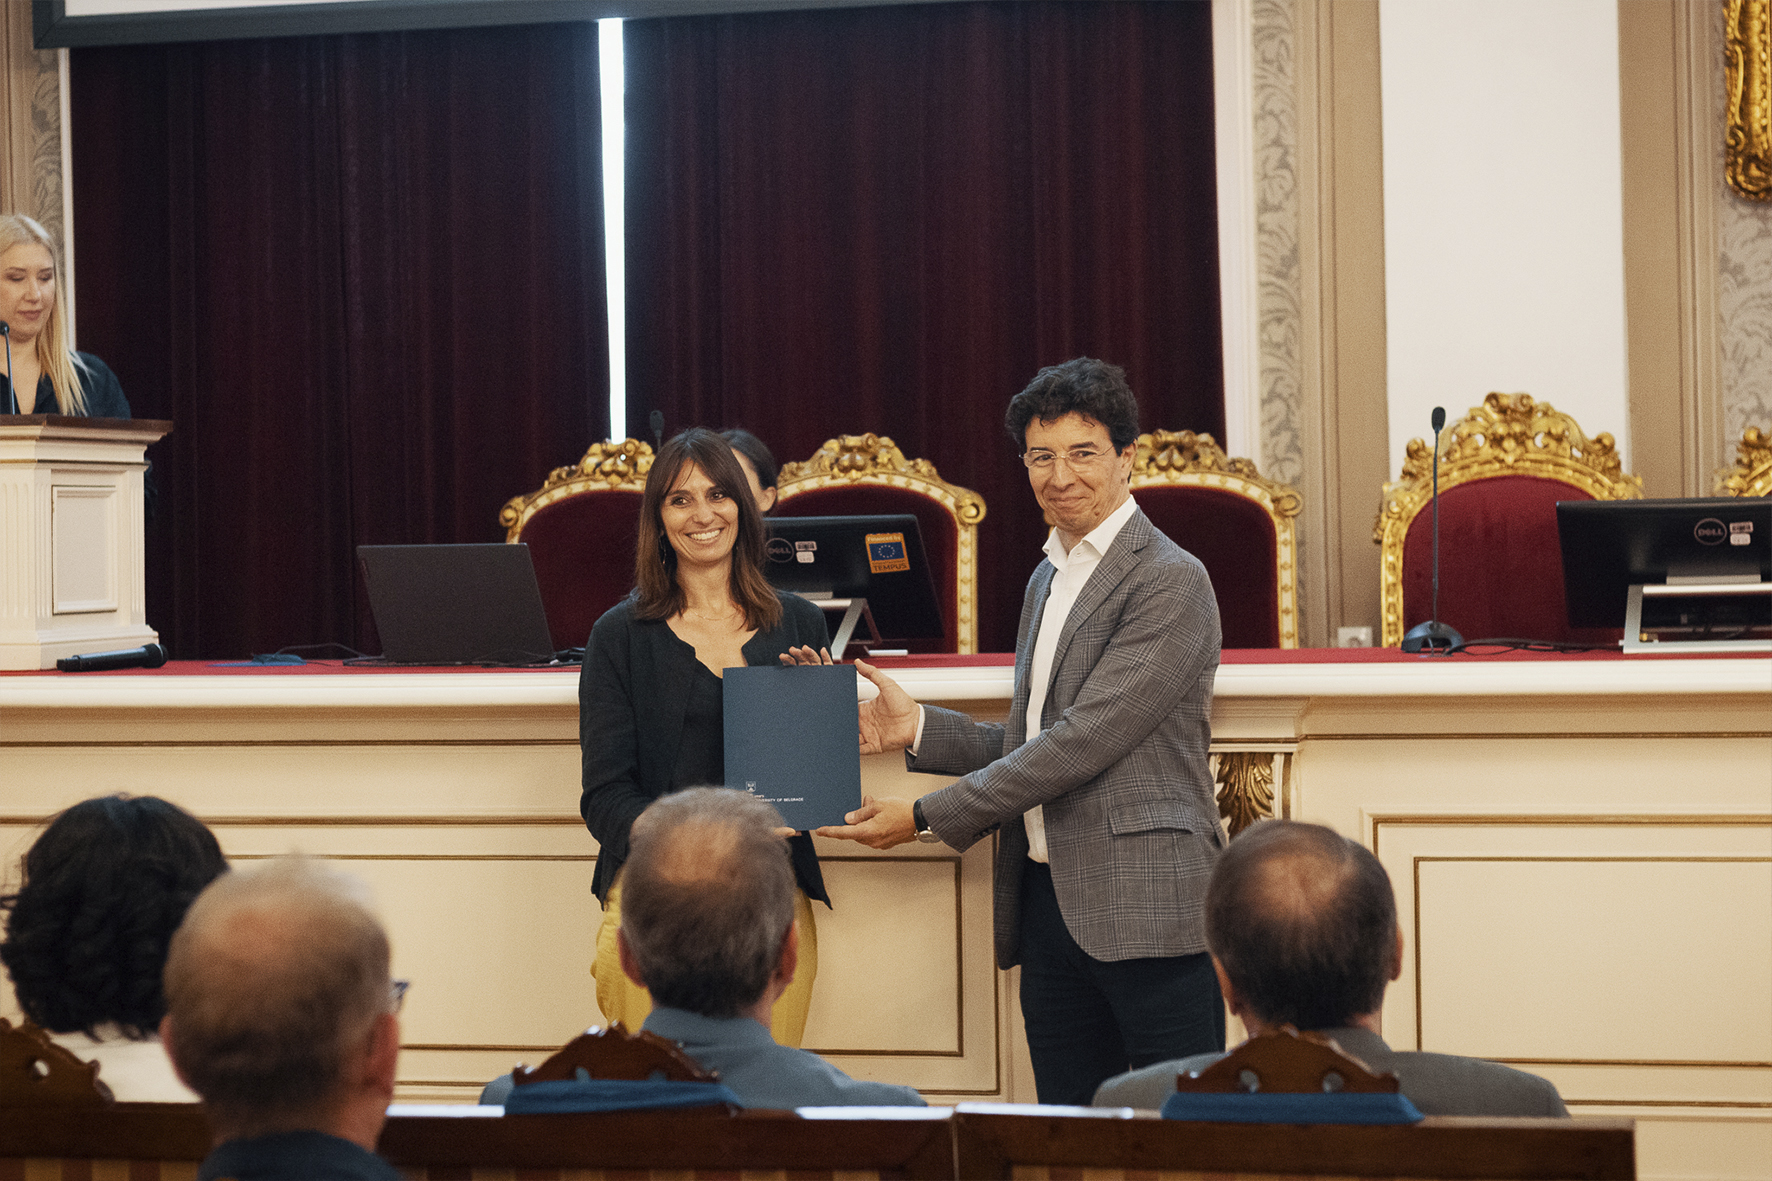 Mr Luciano Catani, Science Attaché at the Embassy of Italy in Serbia handing out the Certificate of Appreciation to the Iuav University of Venice from Italy, received by Prof. Emanuella Sorbo. © Marko Miladinović